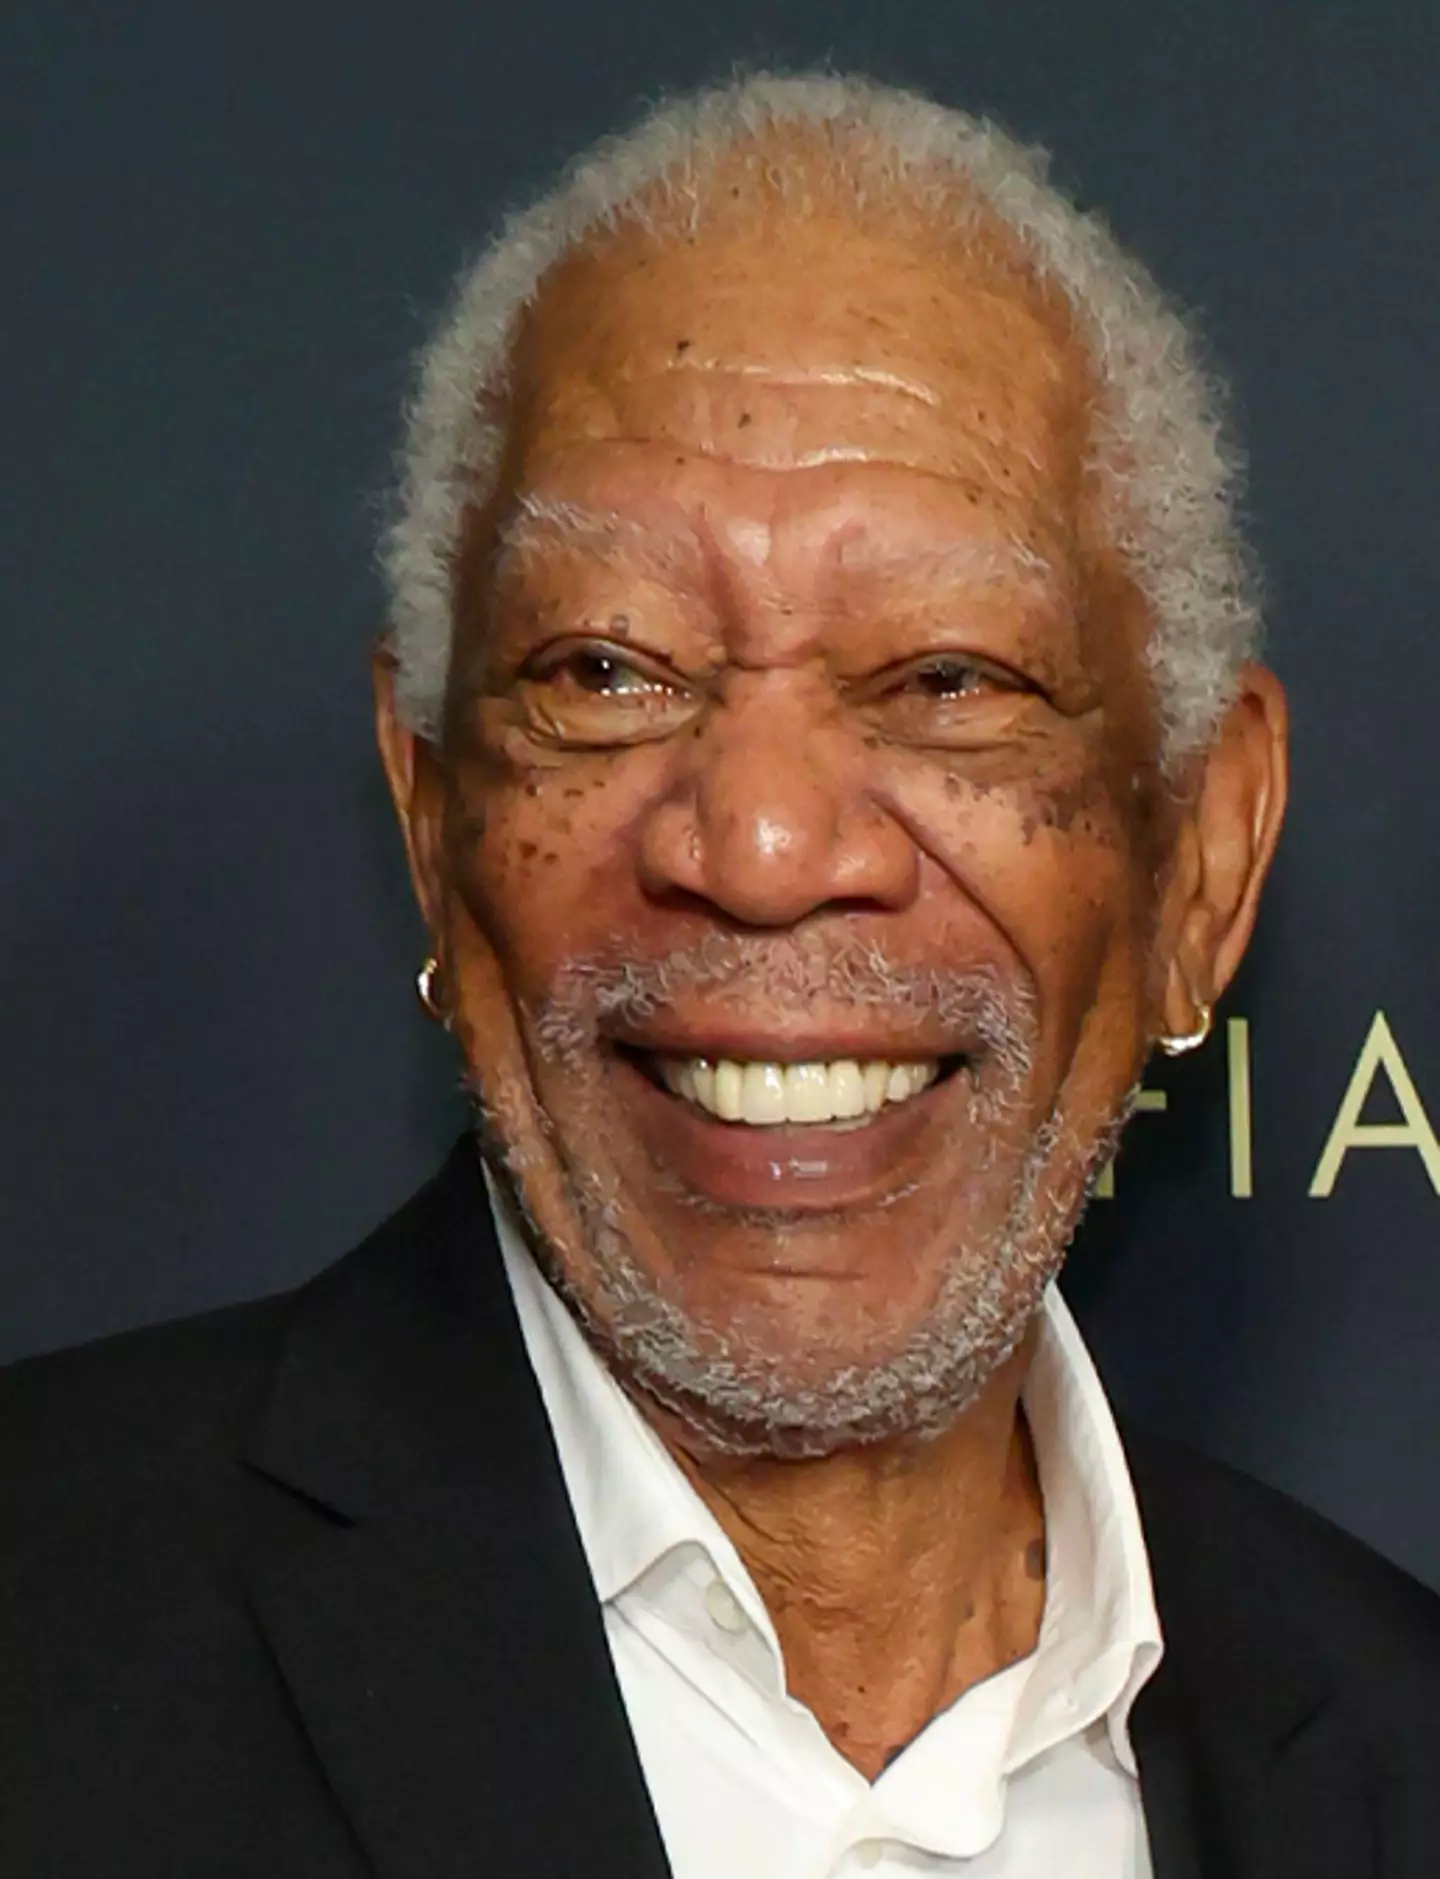 Morgan Freeman voiced his opinion on Black History Month and other subjects related to race.